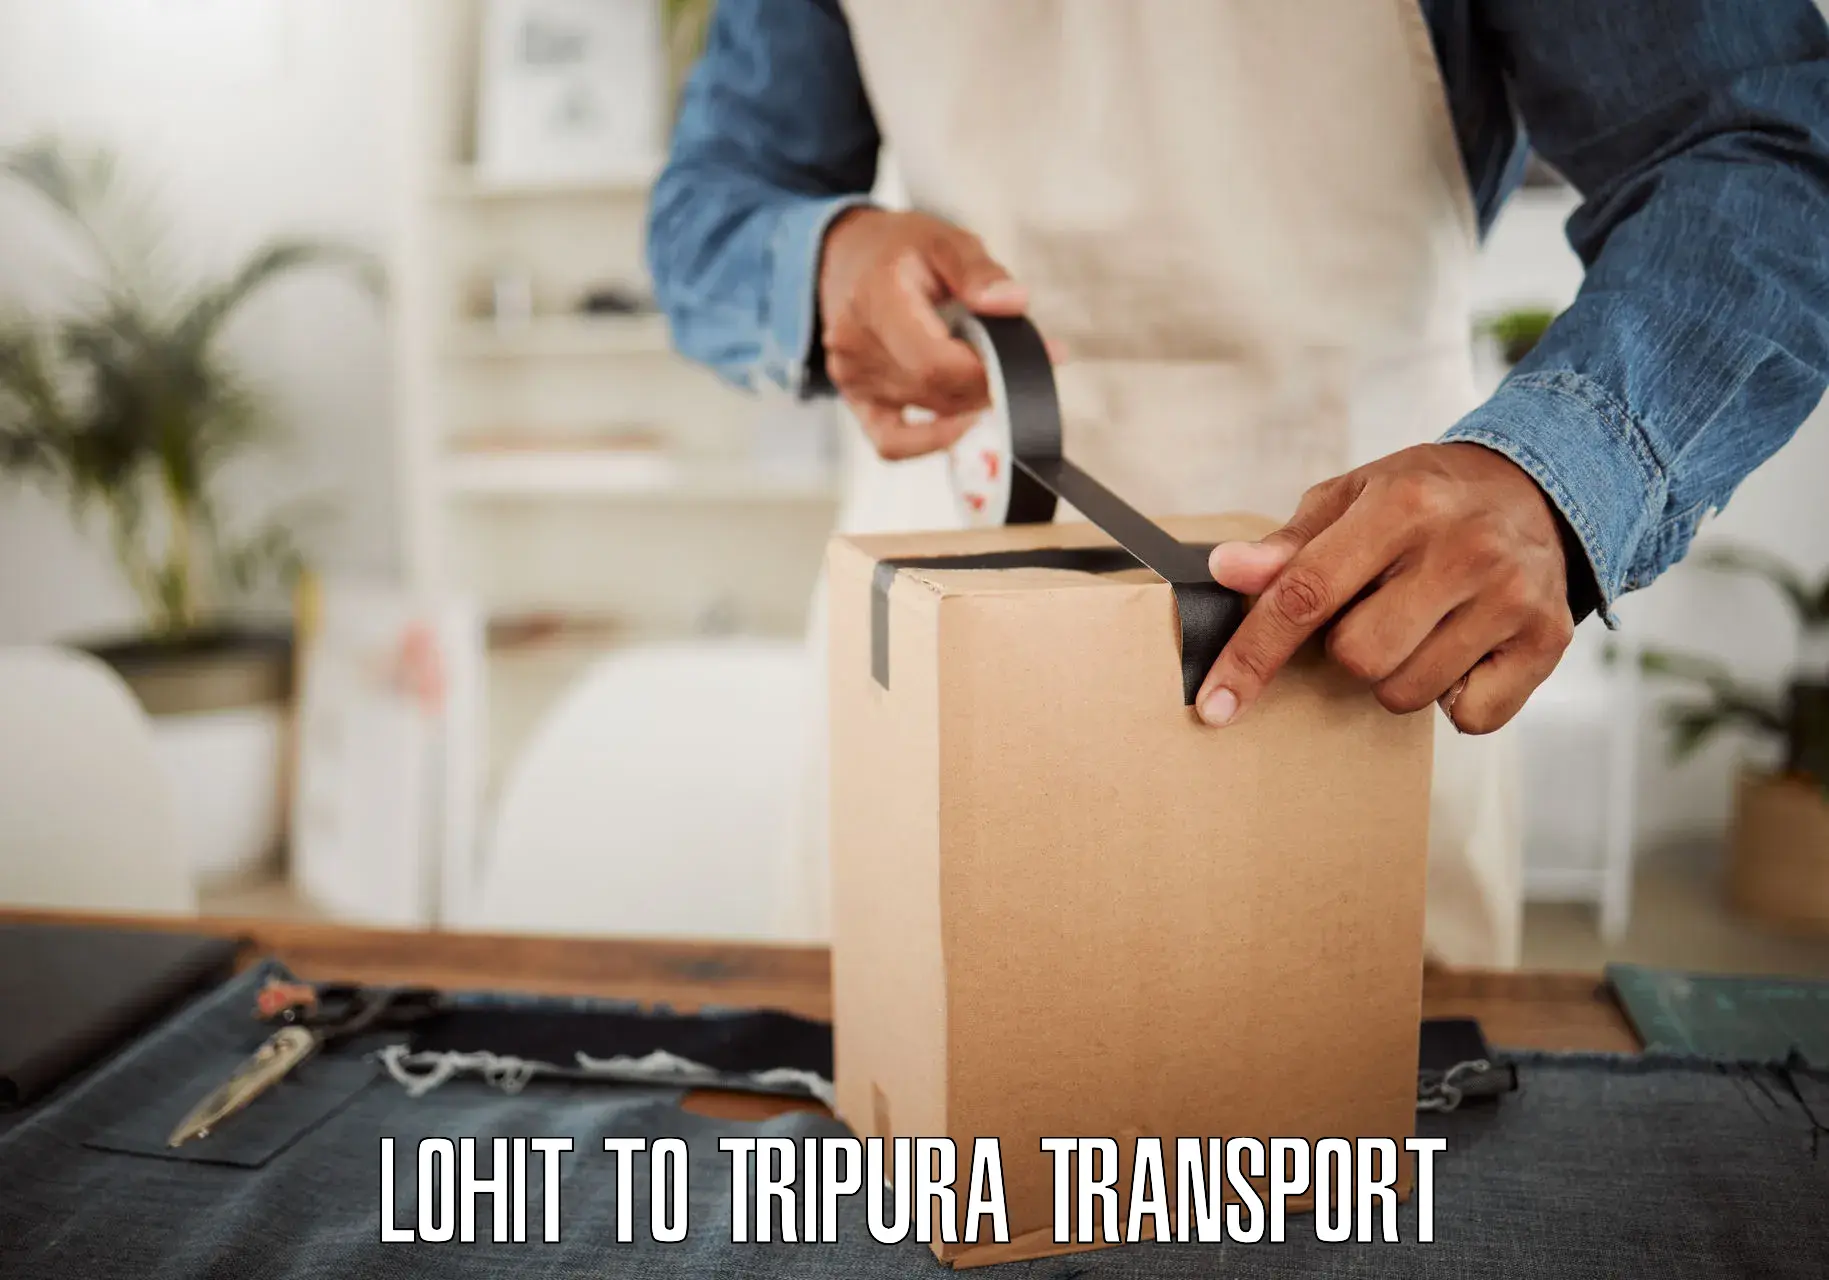 Container transport service Lohit to Tripura